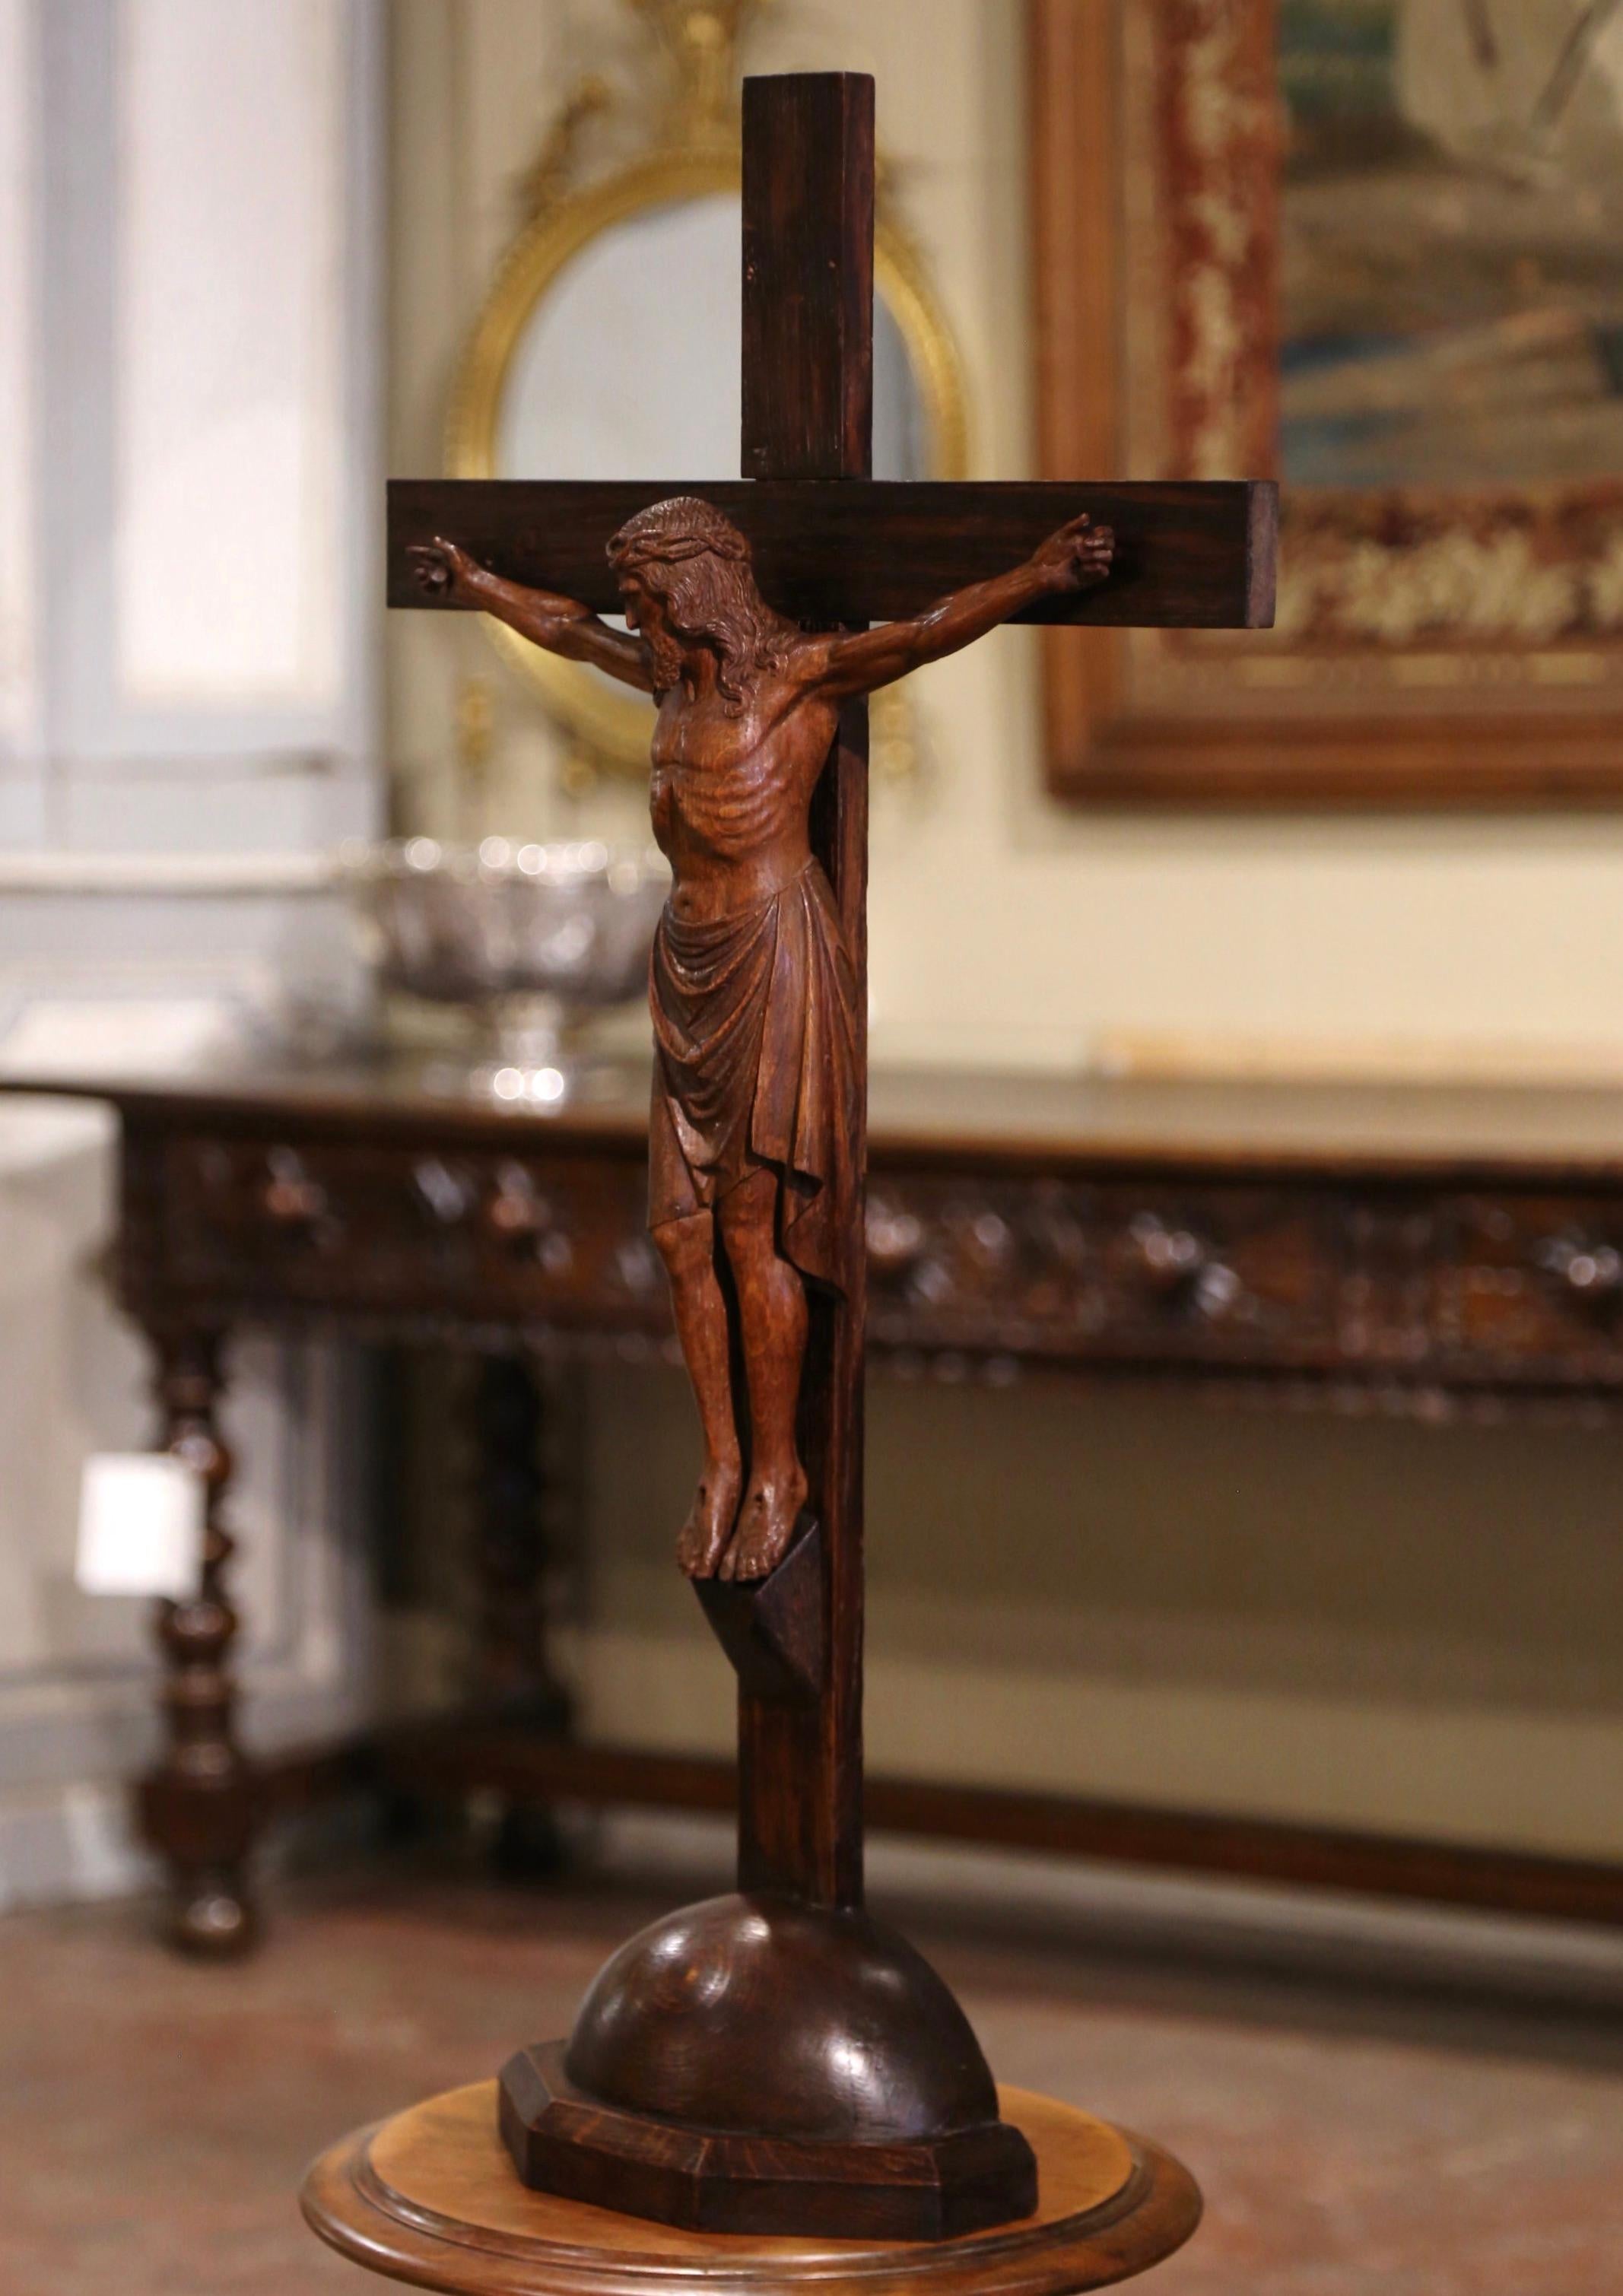 This free standing antique cross was hand carved from oak wood in France. Signed by the artist and dated 1923, the crucifix stands on a globe like base  and features our Lord Jesus Christ nailed on the cross. The large religious item is in excellent